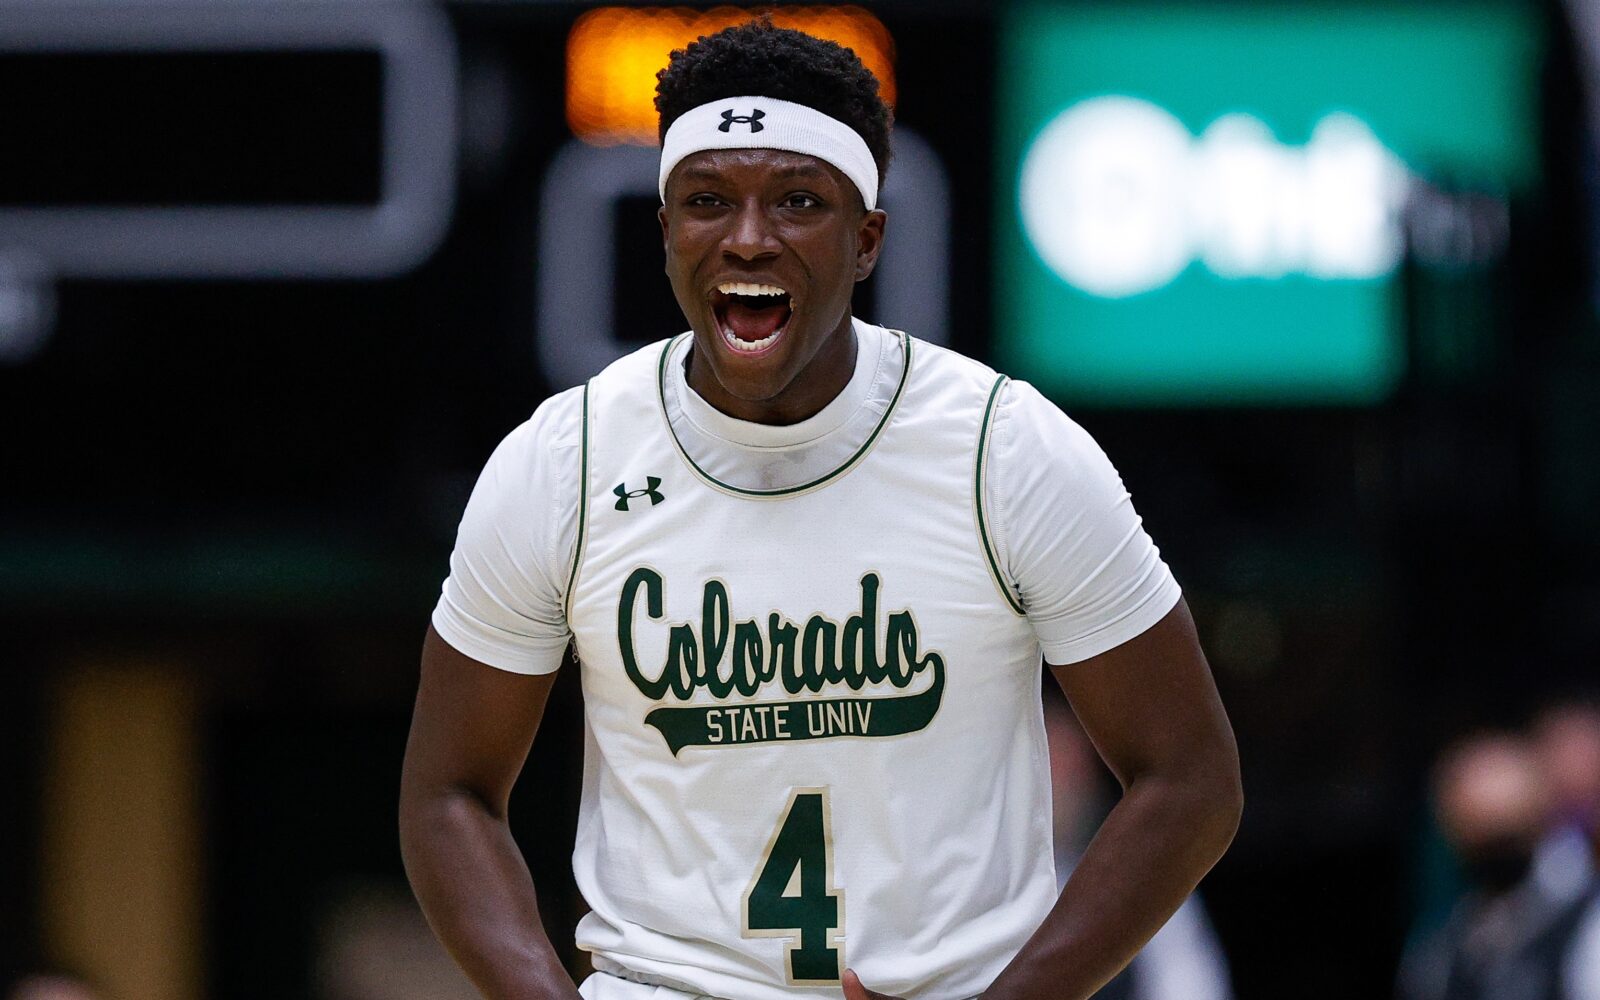 CSU junior point guard Isaiah Stevens is a 'student of the game